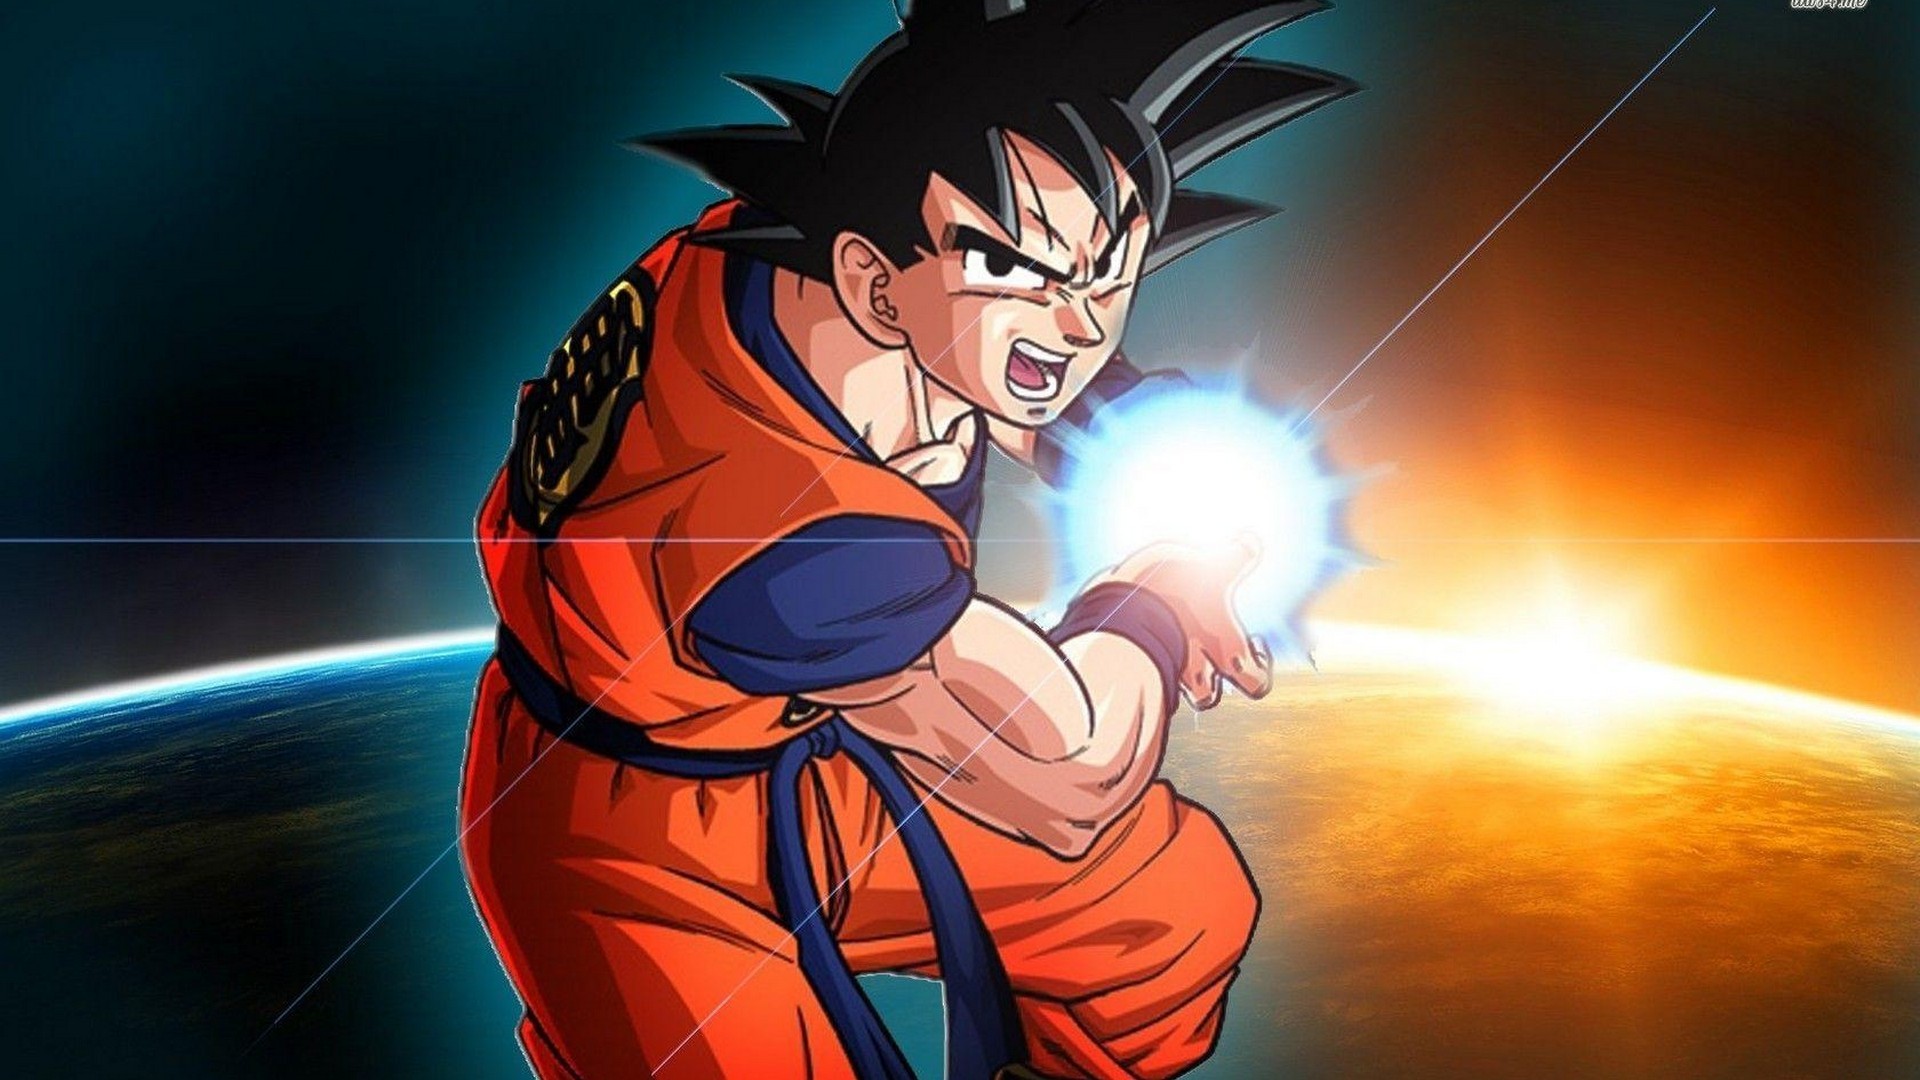 Goku Images Desktop Backgrounds HD with resolution 1920X1080 pixel. You can use this wallpaper as background for your desktop Computer Screensavers, Android or iPhone smartphones